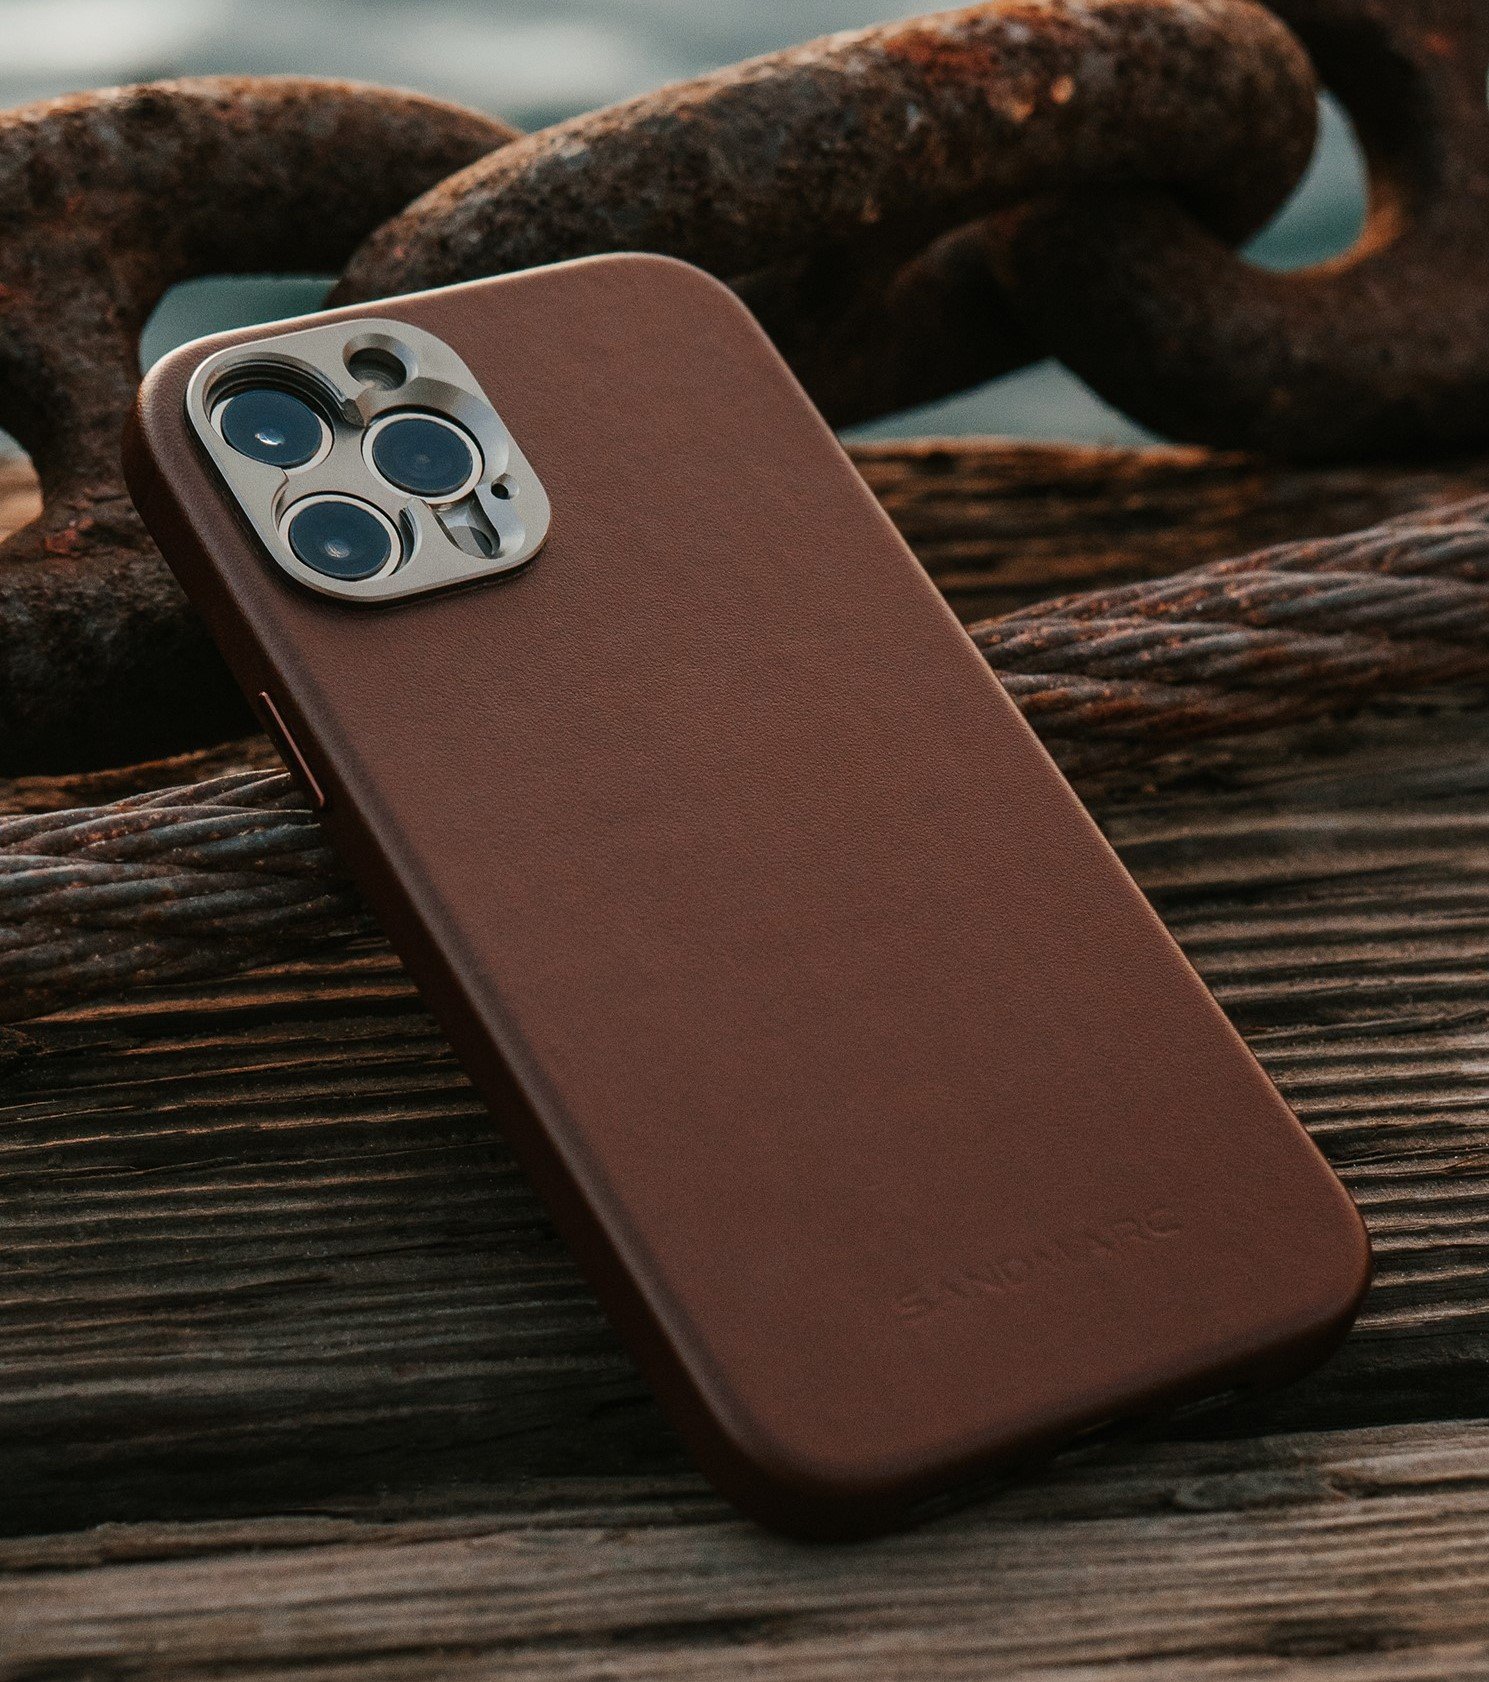 Leather iPhone 12 Pro Max Hard Cover - MagSafe